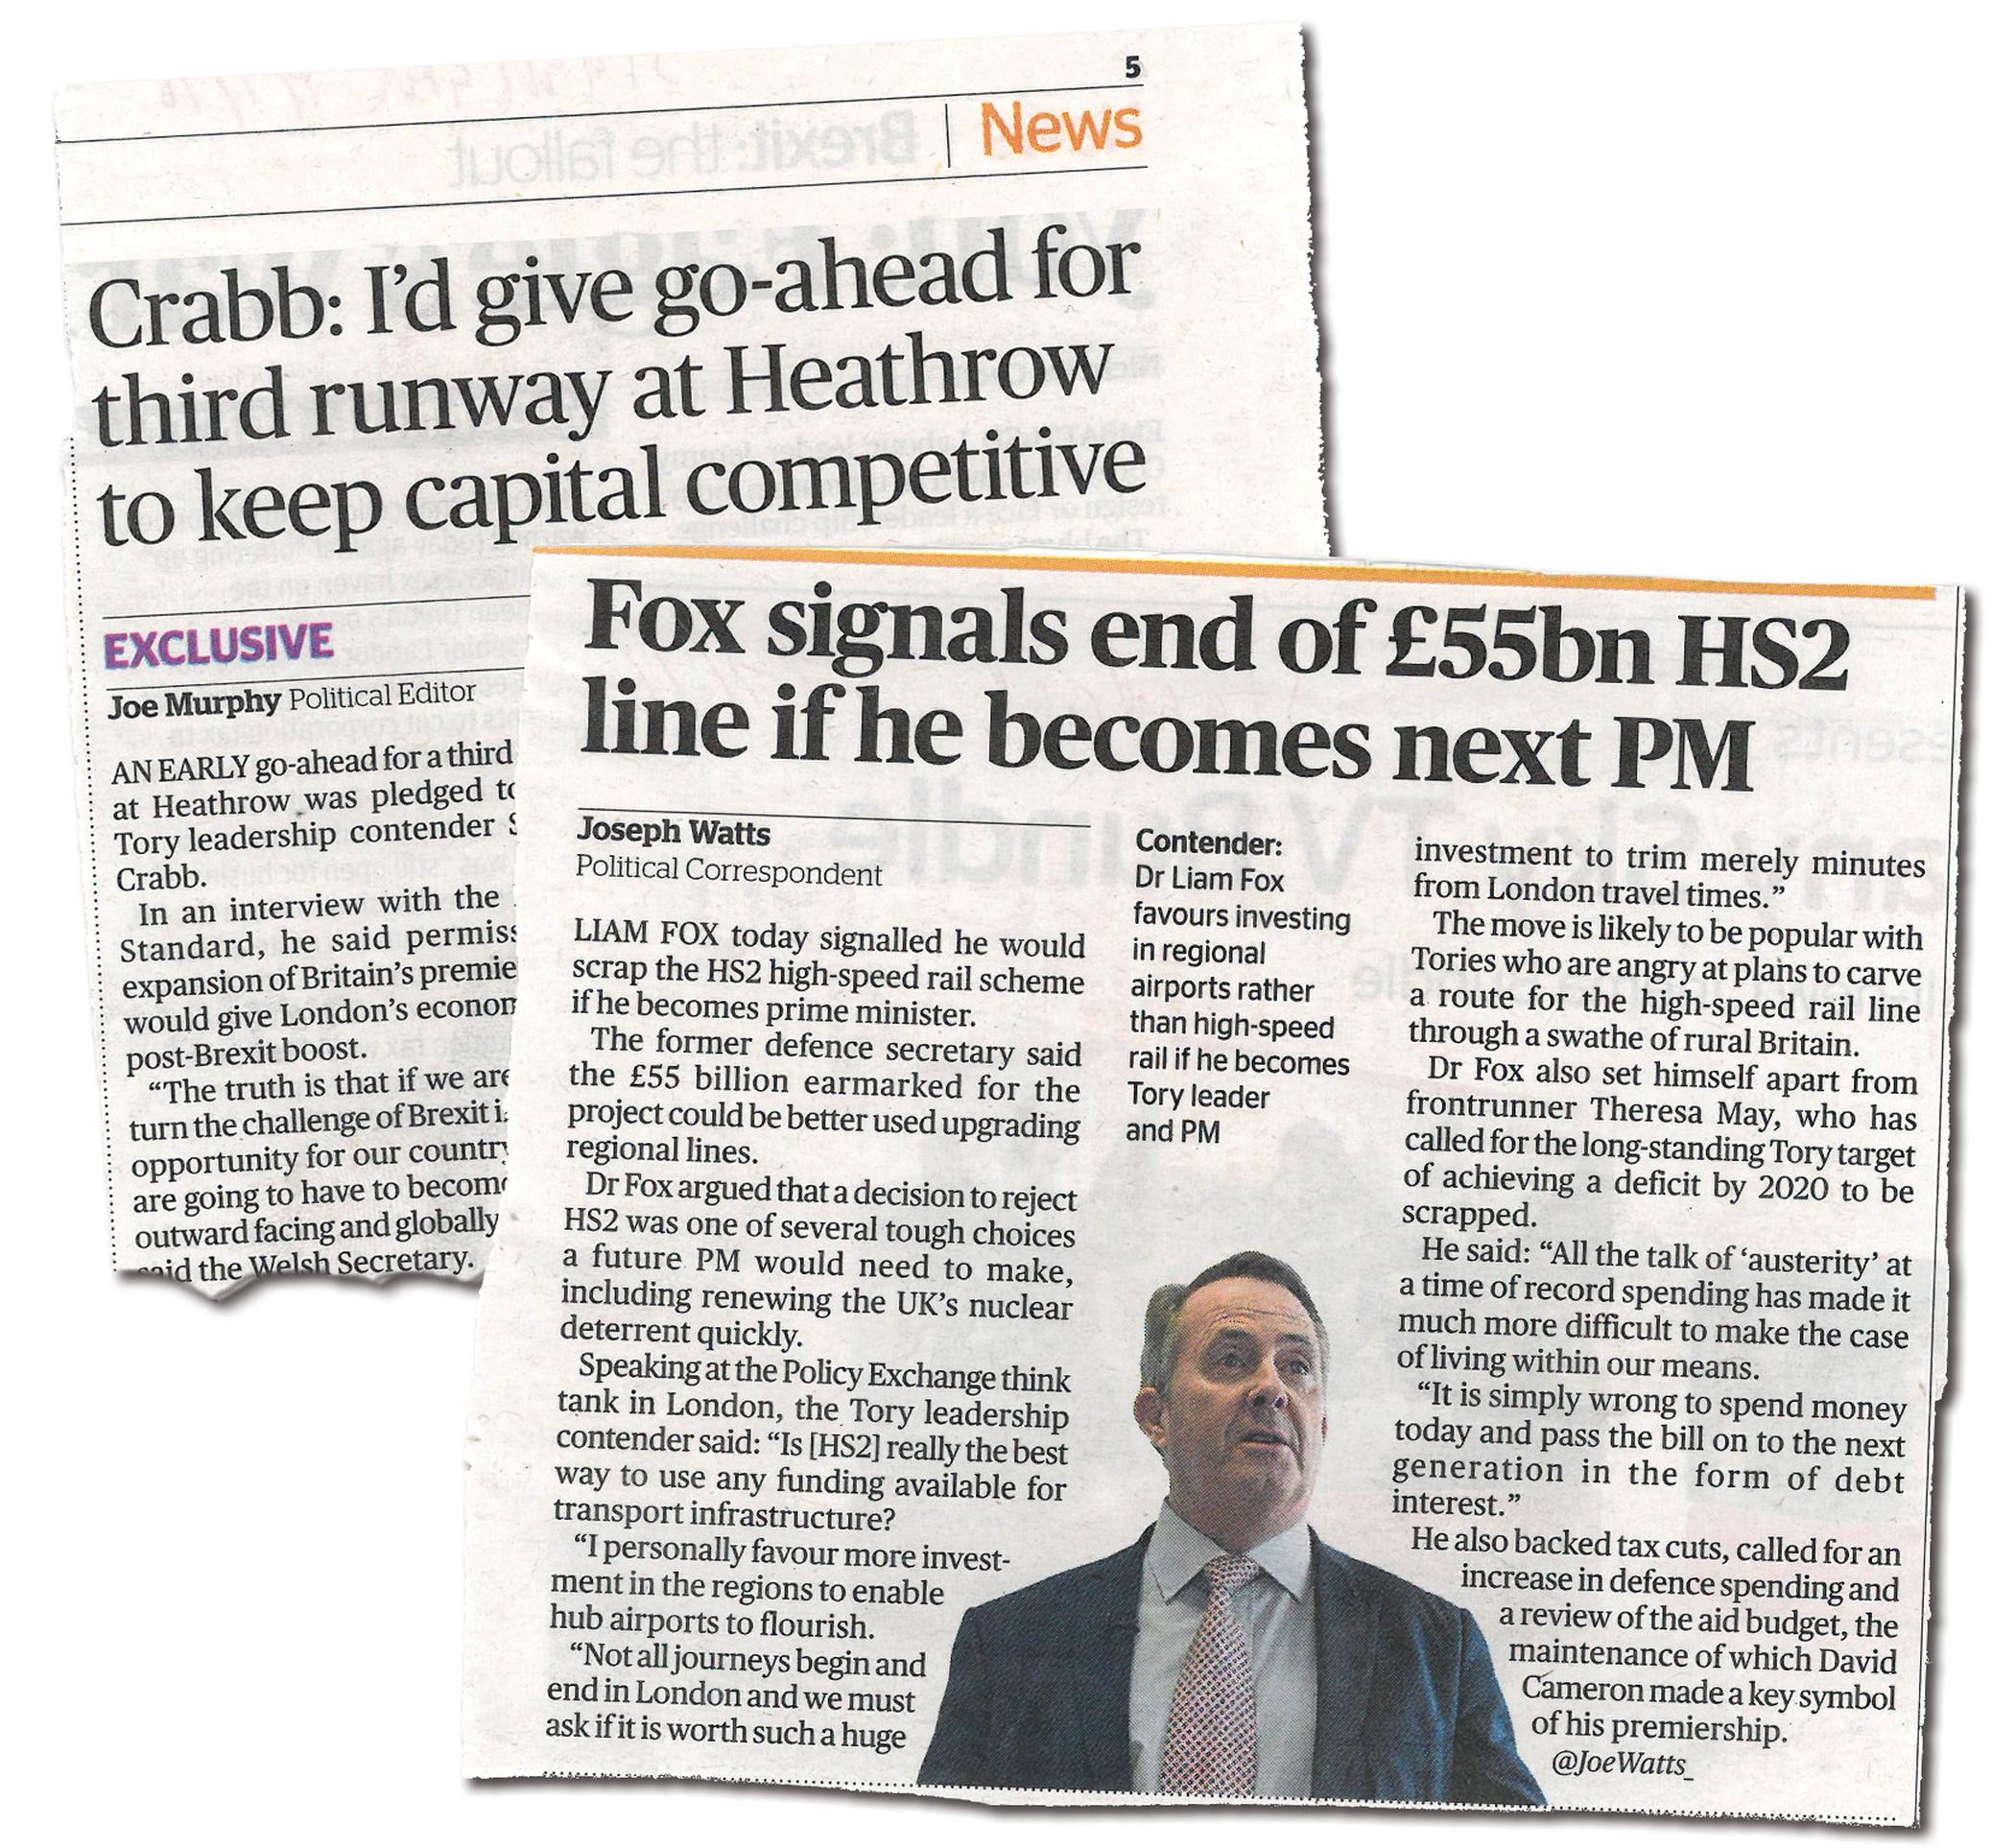 Heathrow expansion dominated media transport coverage of the Brexit vote, although HS2 did get a brief mention or two